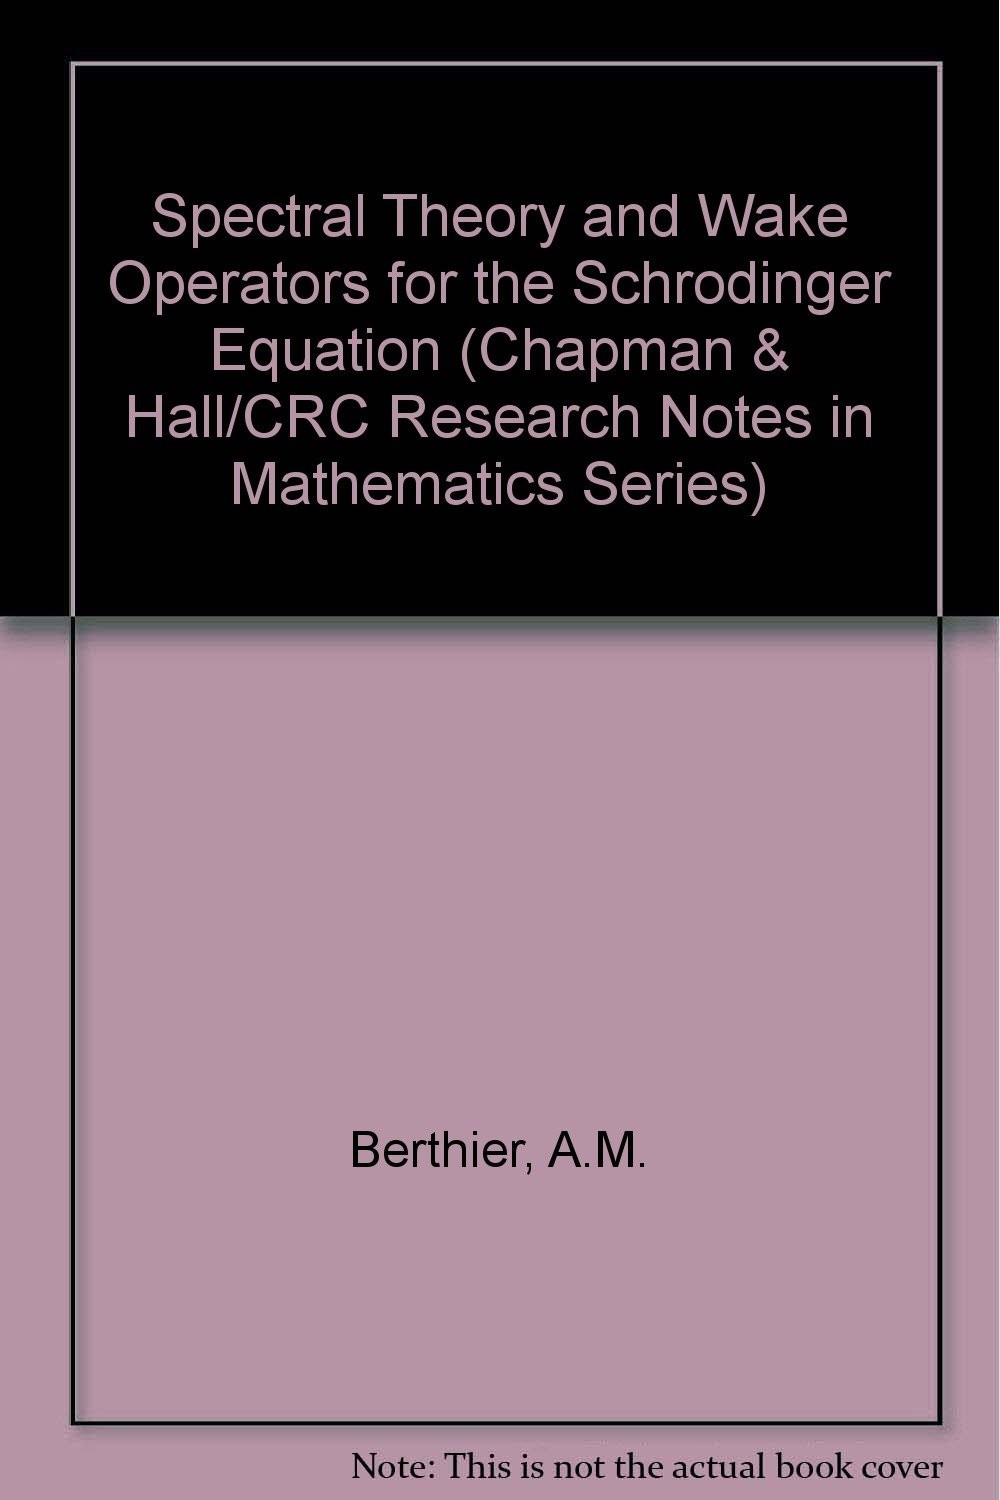 Spectral Theory and Wave Operators for the Schrödinger Equation